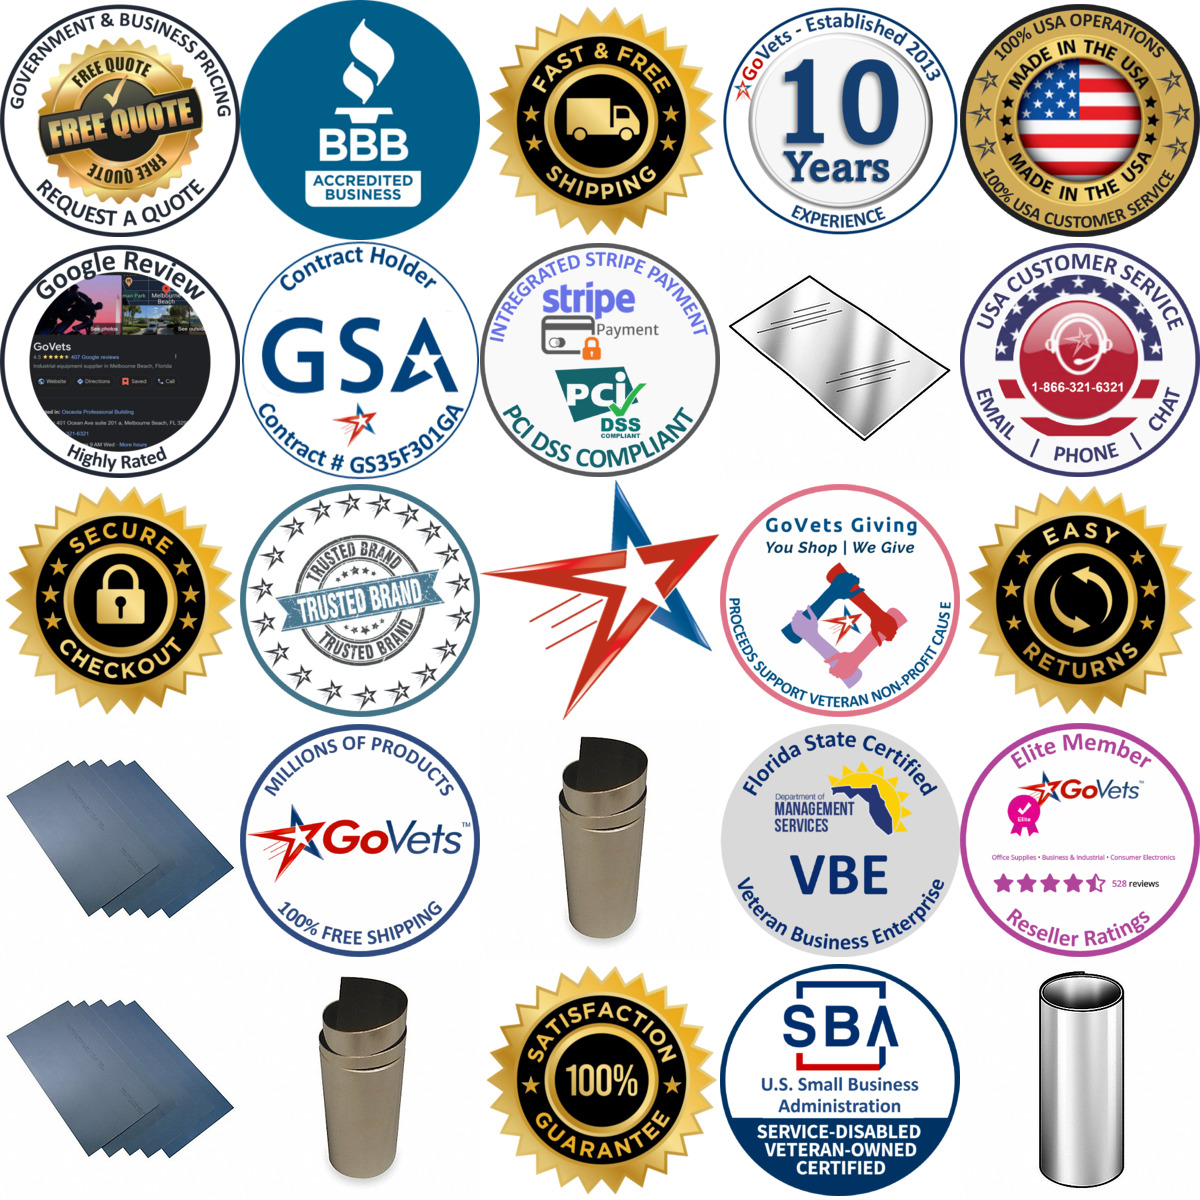 A selection of Shim Stock products on GoVets